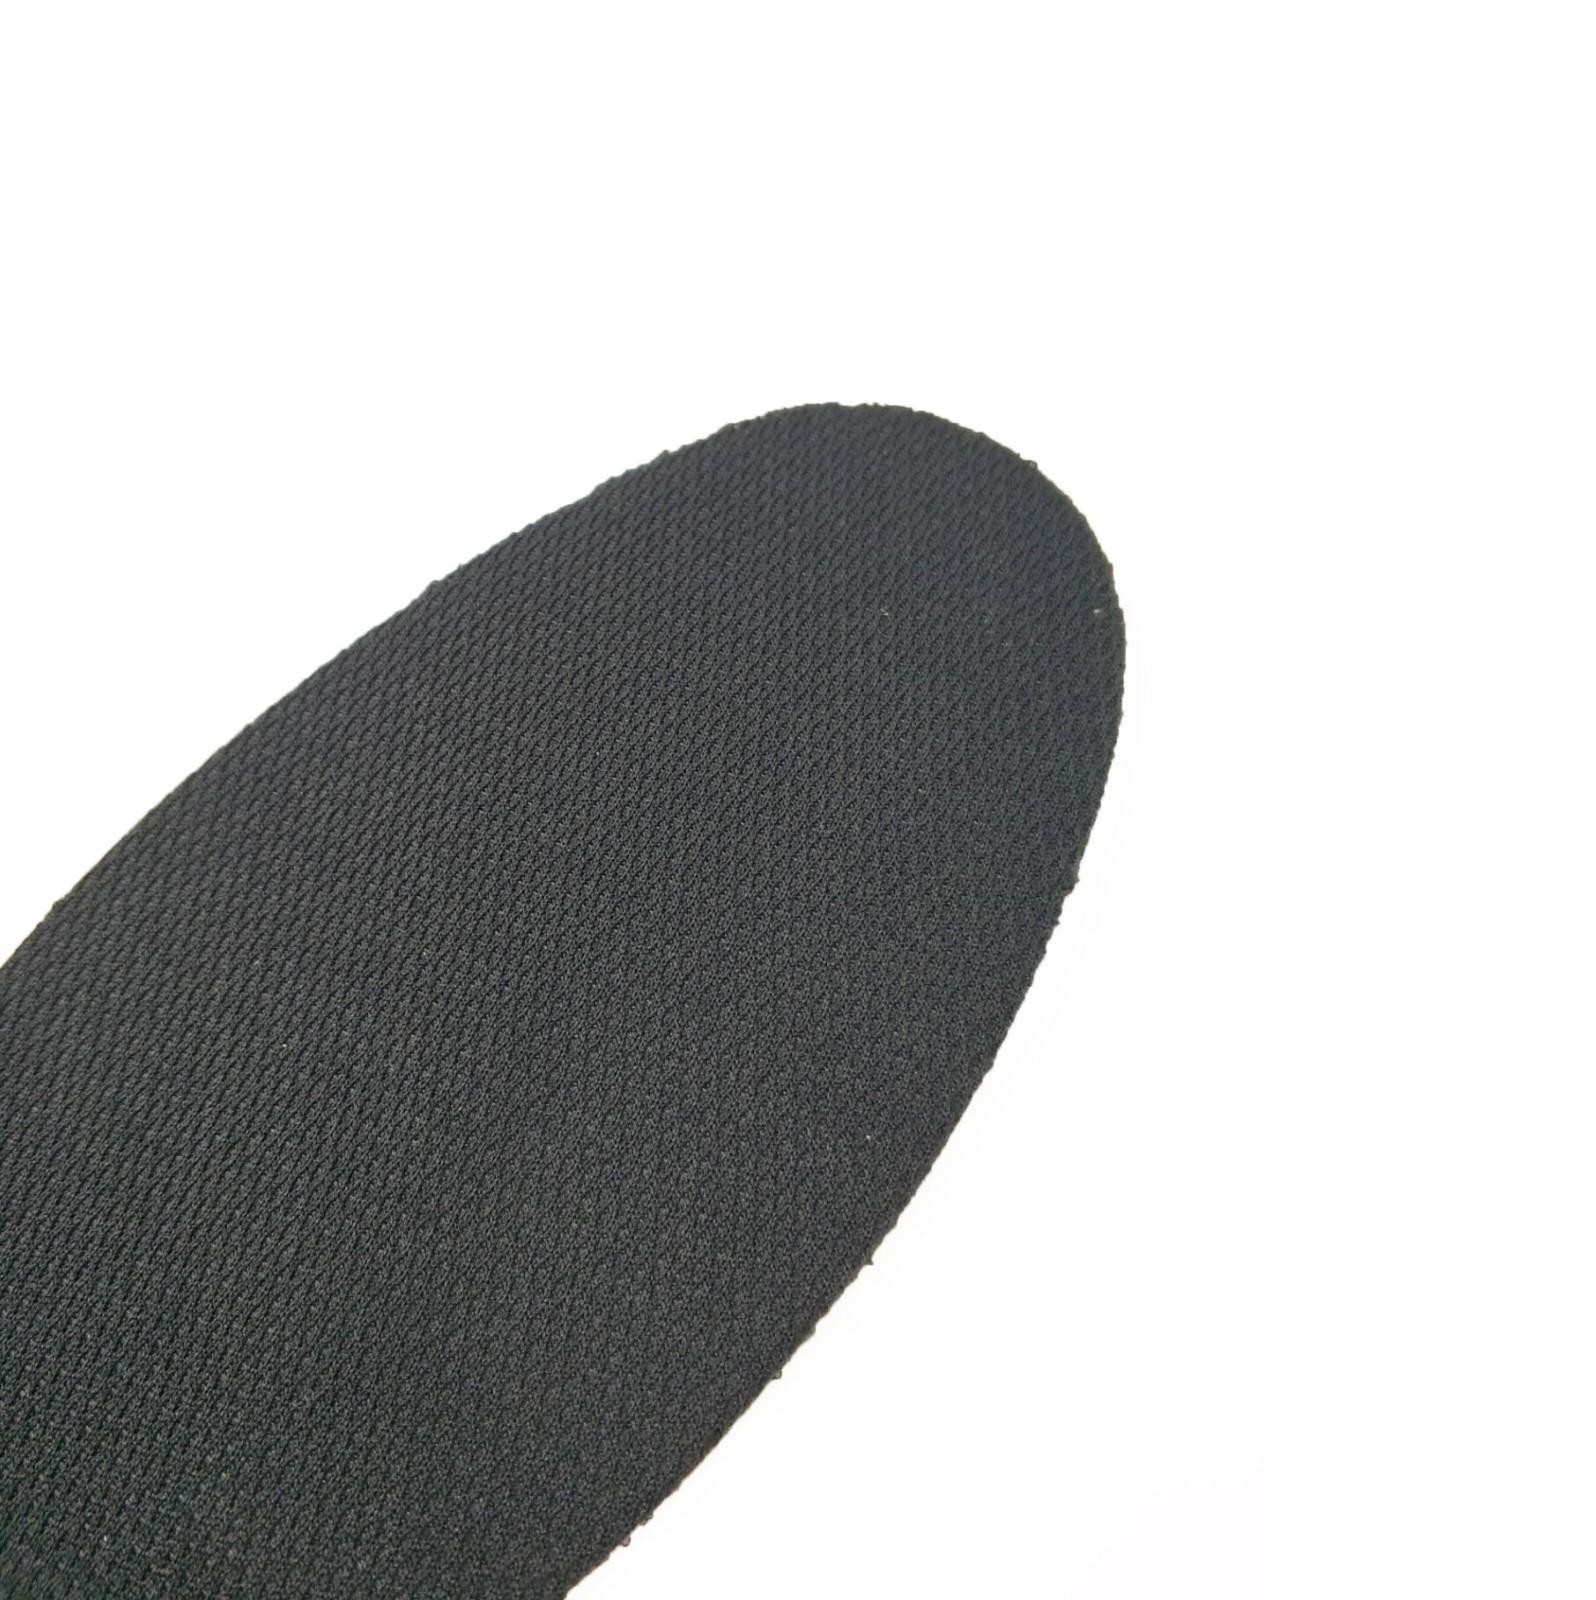 S-King winter boot insoles Supply for golfing